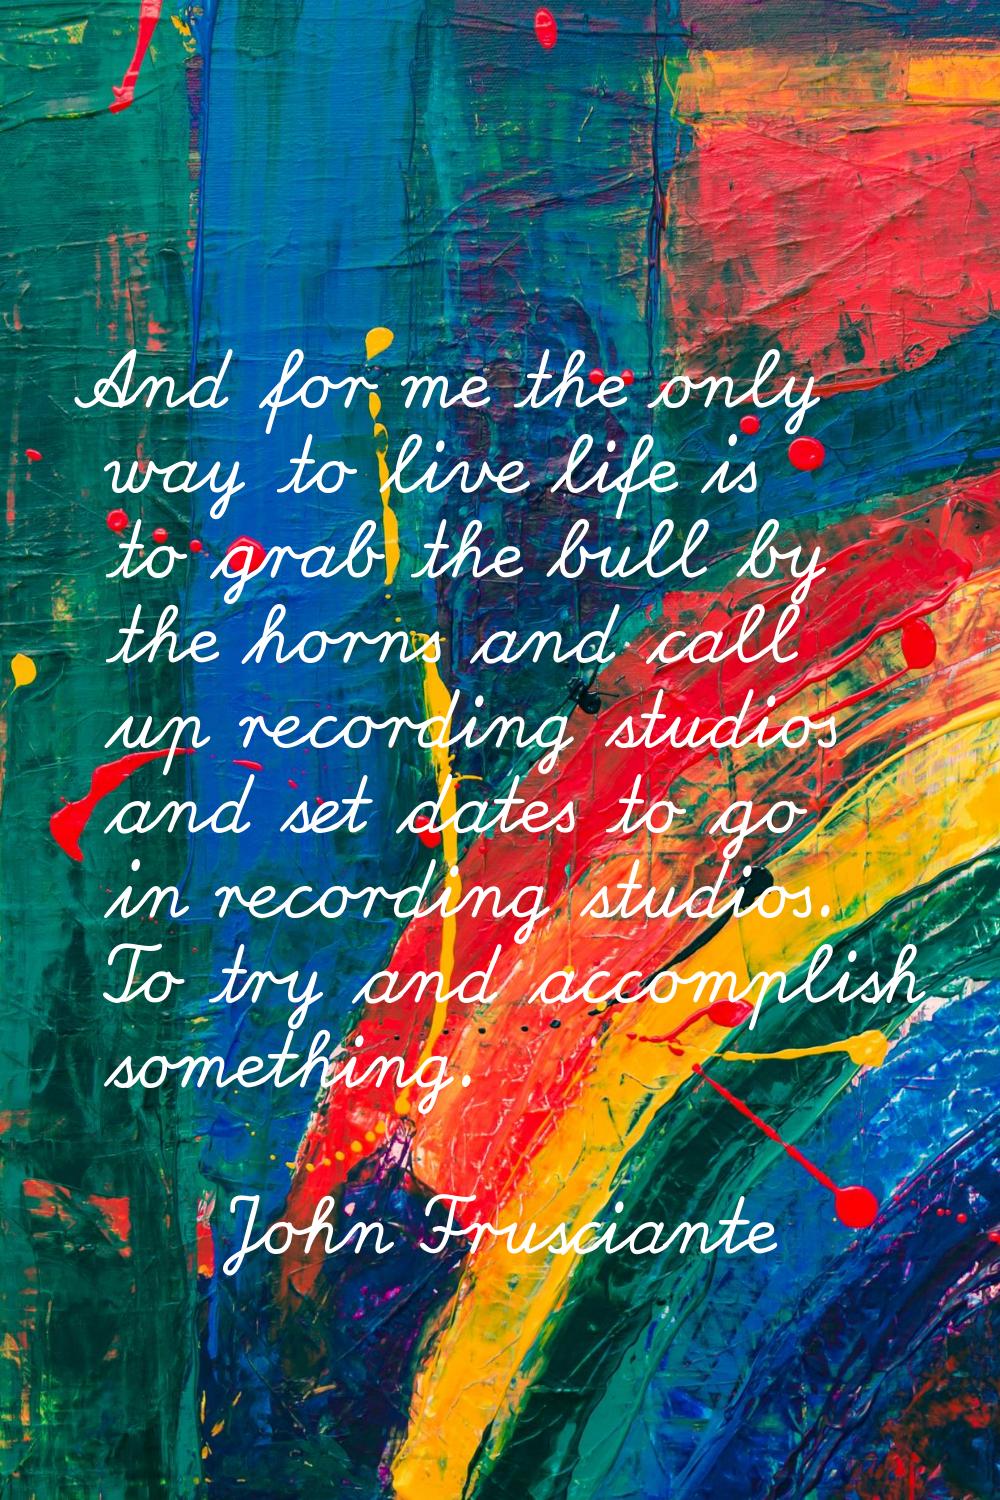 And for me the only way to live life is to grab the bull by the horns and call up recording studios